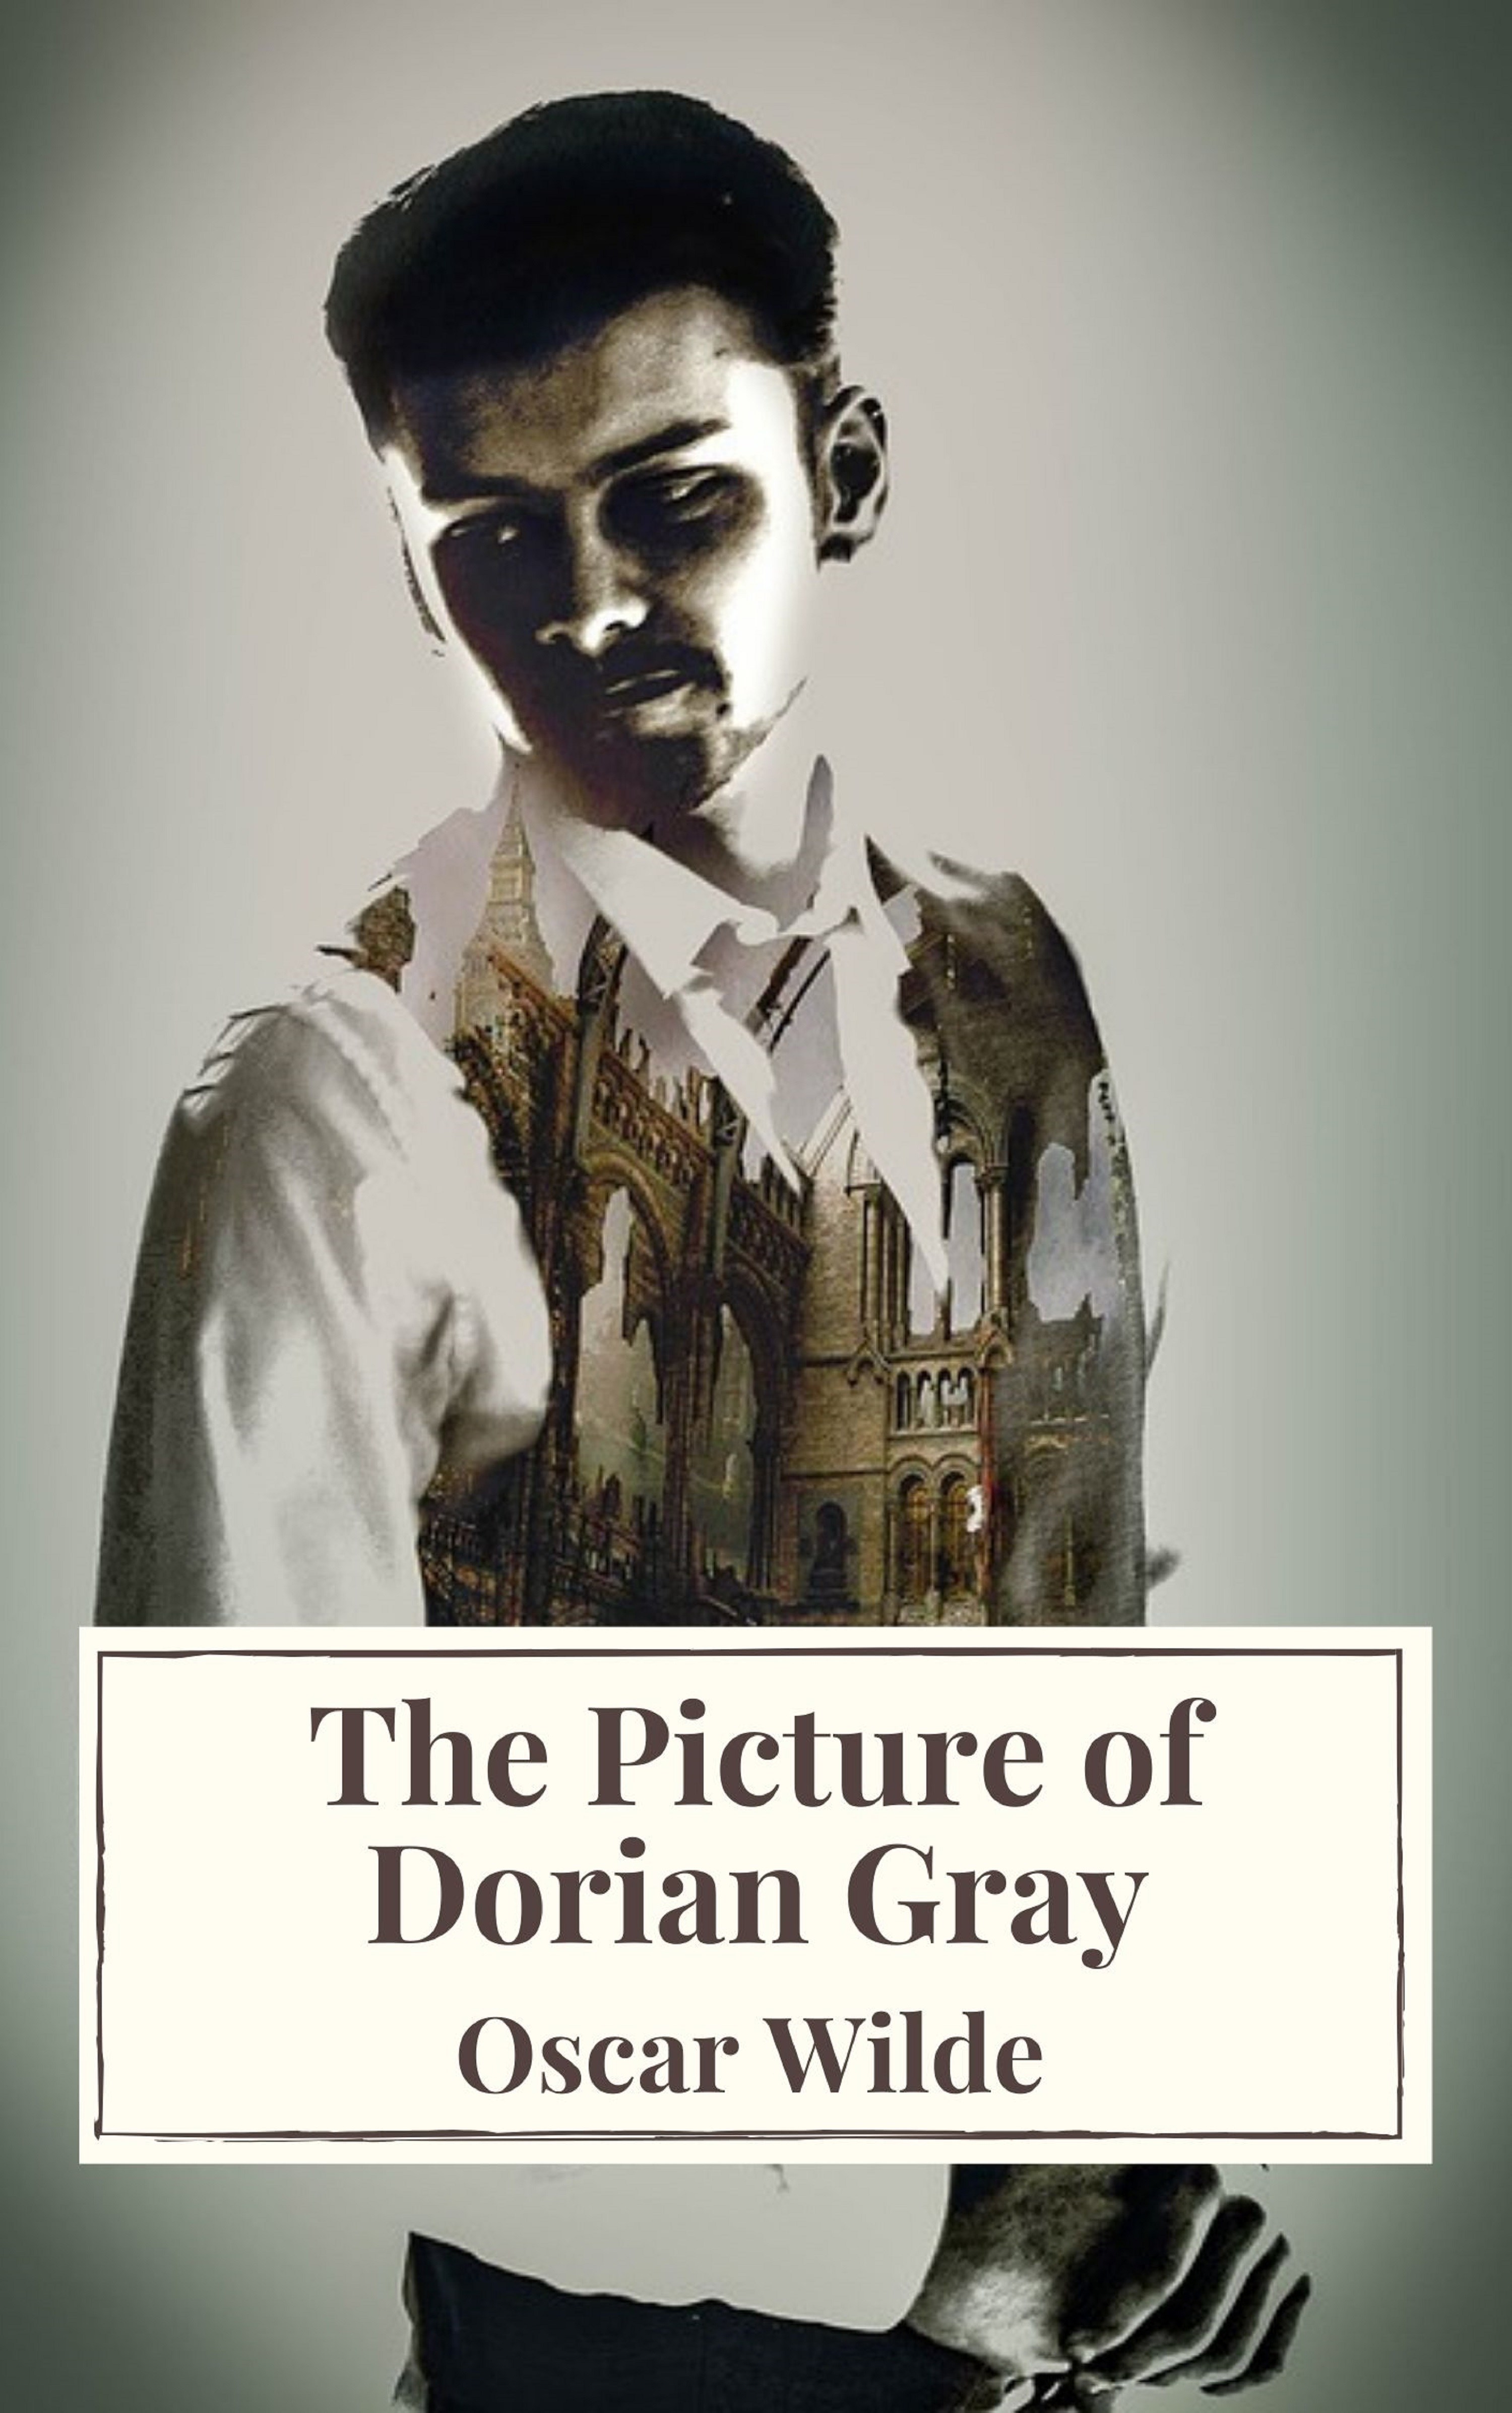 Only novel. Oscar Wilde the picture of Dorian Gray. The picture of Dorian Gray book. The picture of Dorian Gray book Oscar. The picture of Dorian Gray book Black.